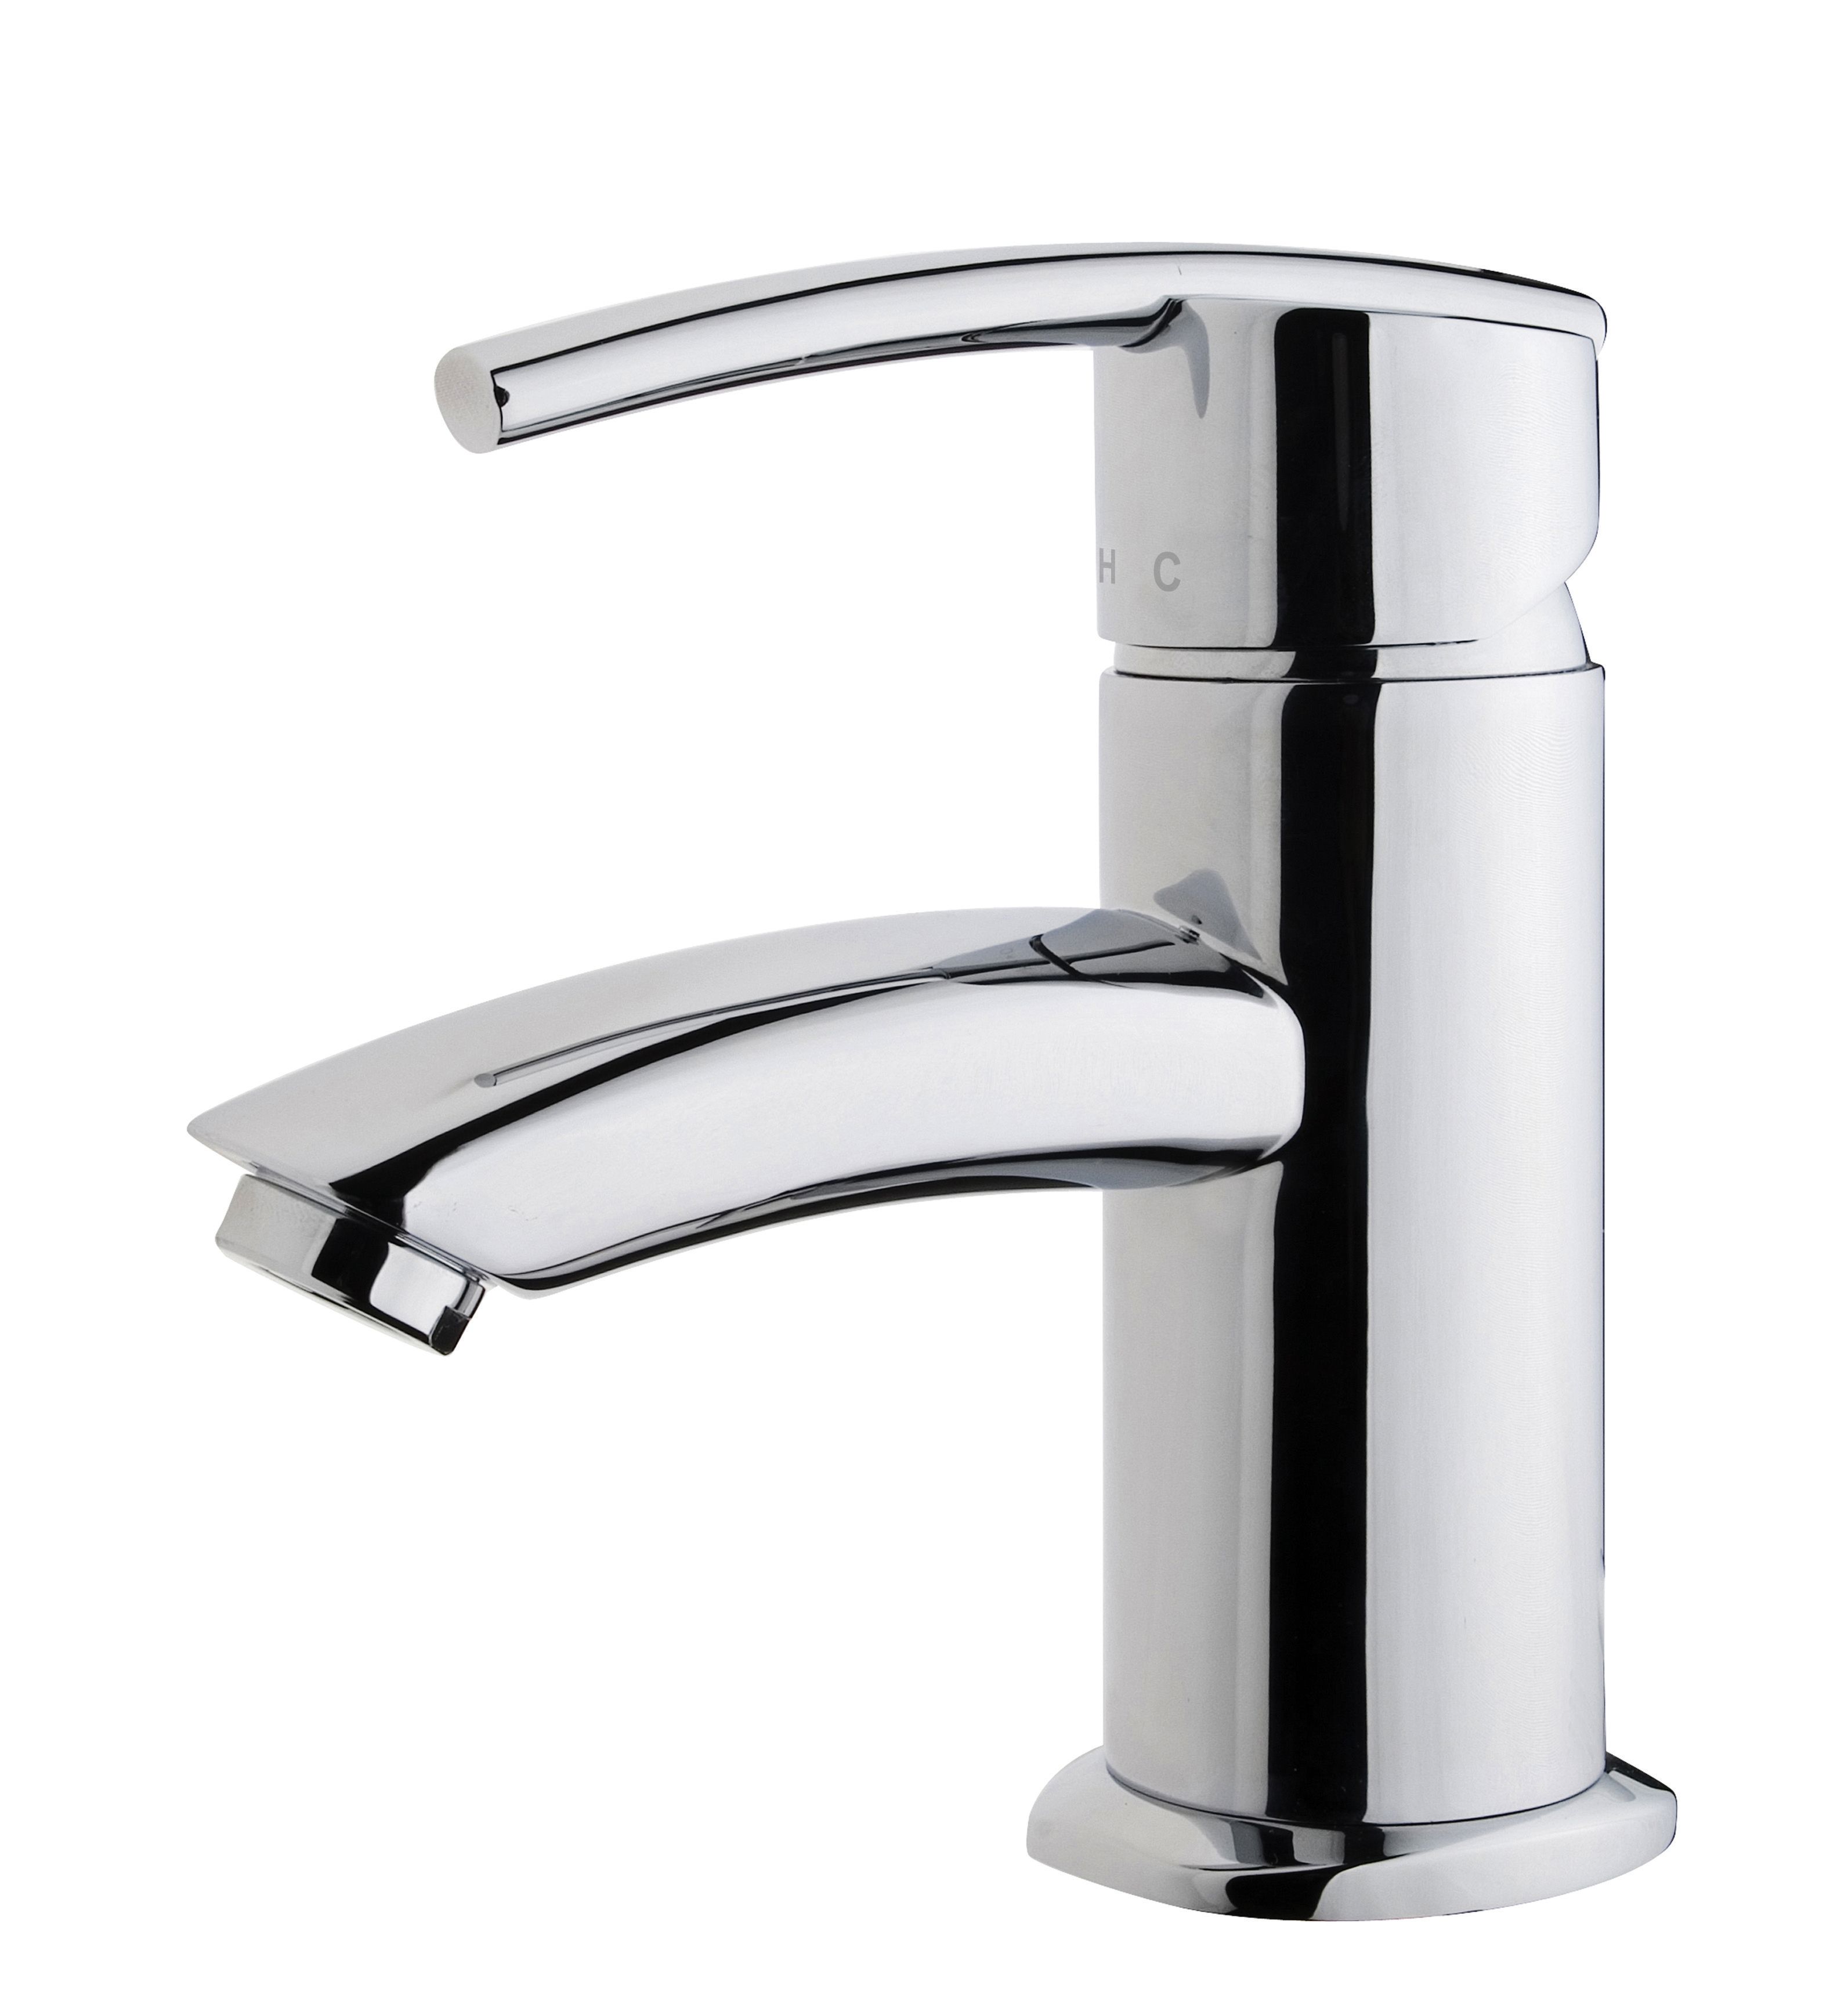 Image of Wickes Versaille Basin Mixer Tap - Chrome